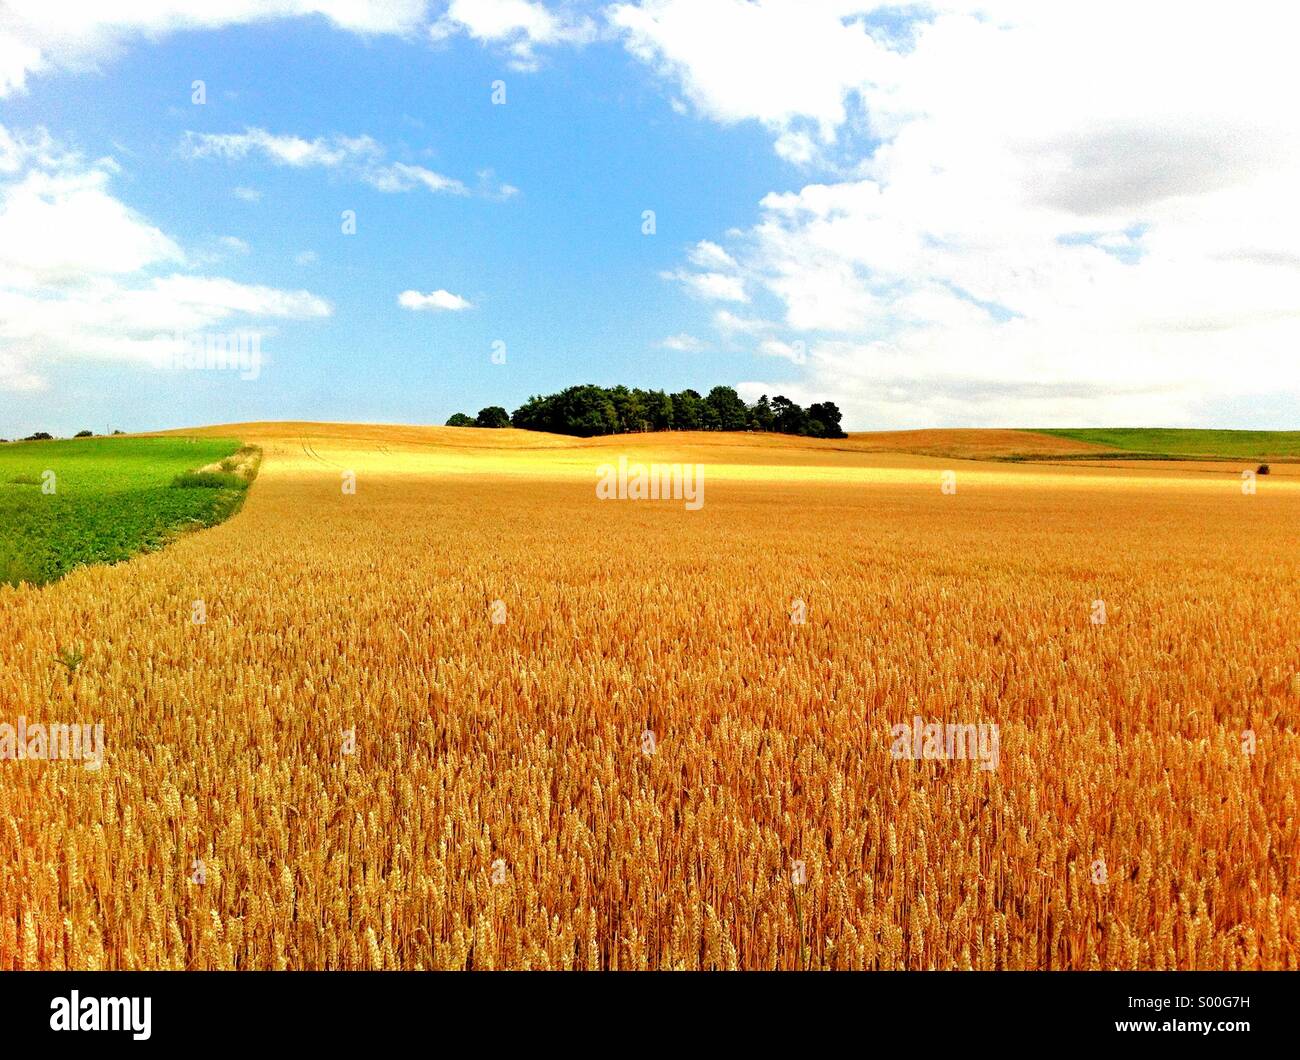 England Suffolk Landscape field of Barley with Tree copse on skyline summertime Stock Photo